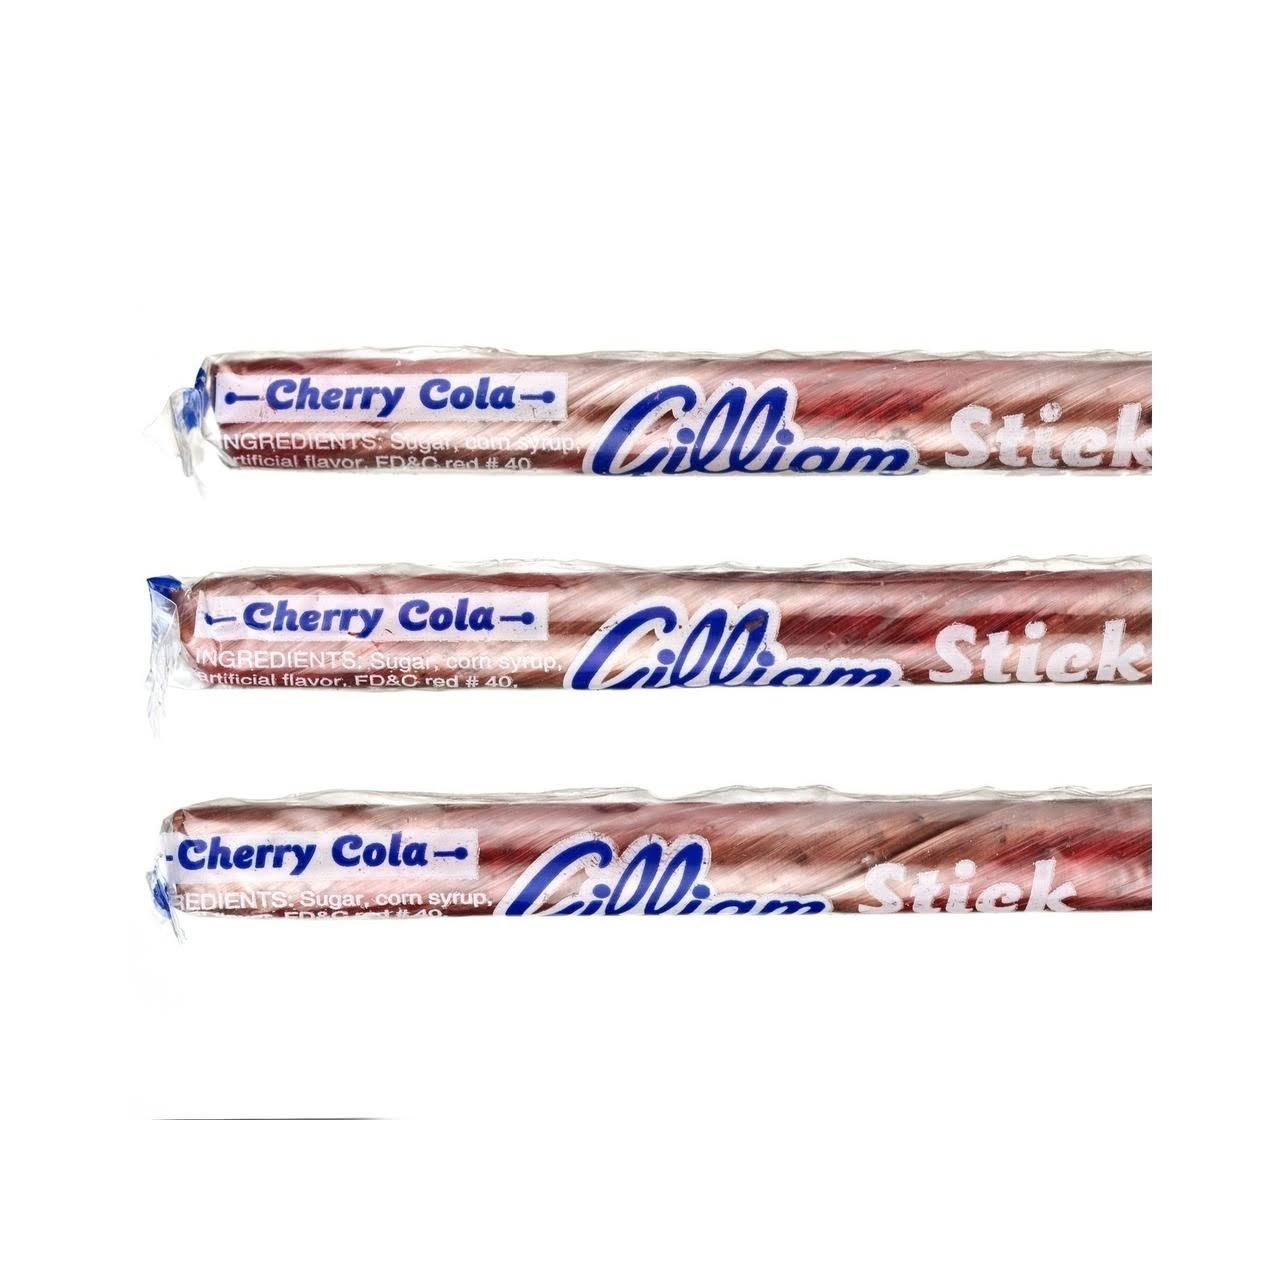 Gilliam Old Fashioned Cherry Cola Stick Candy